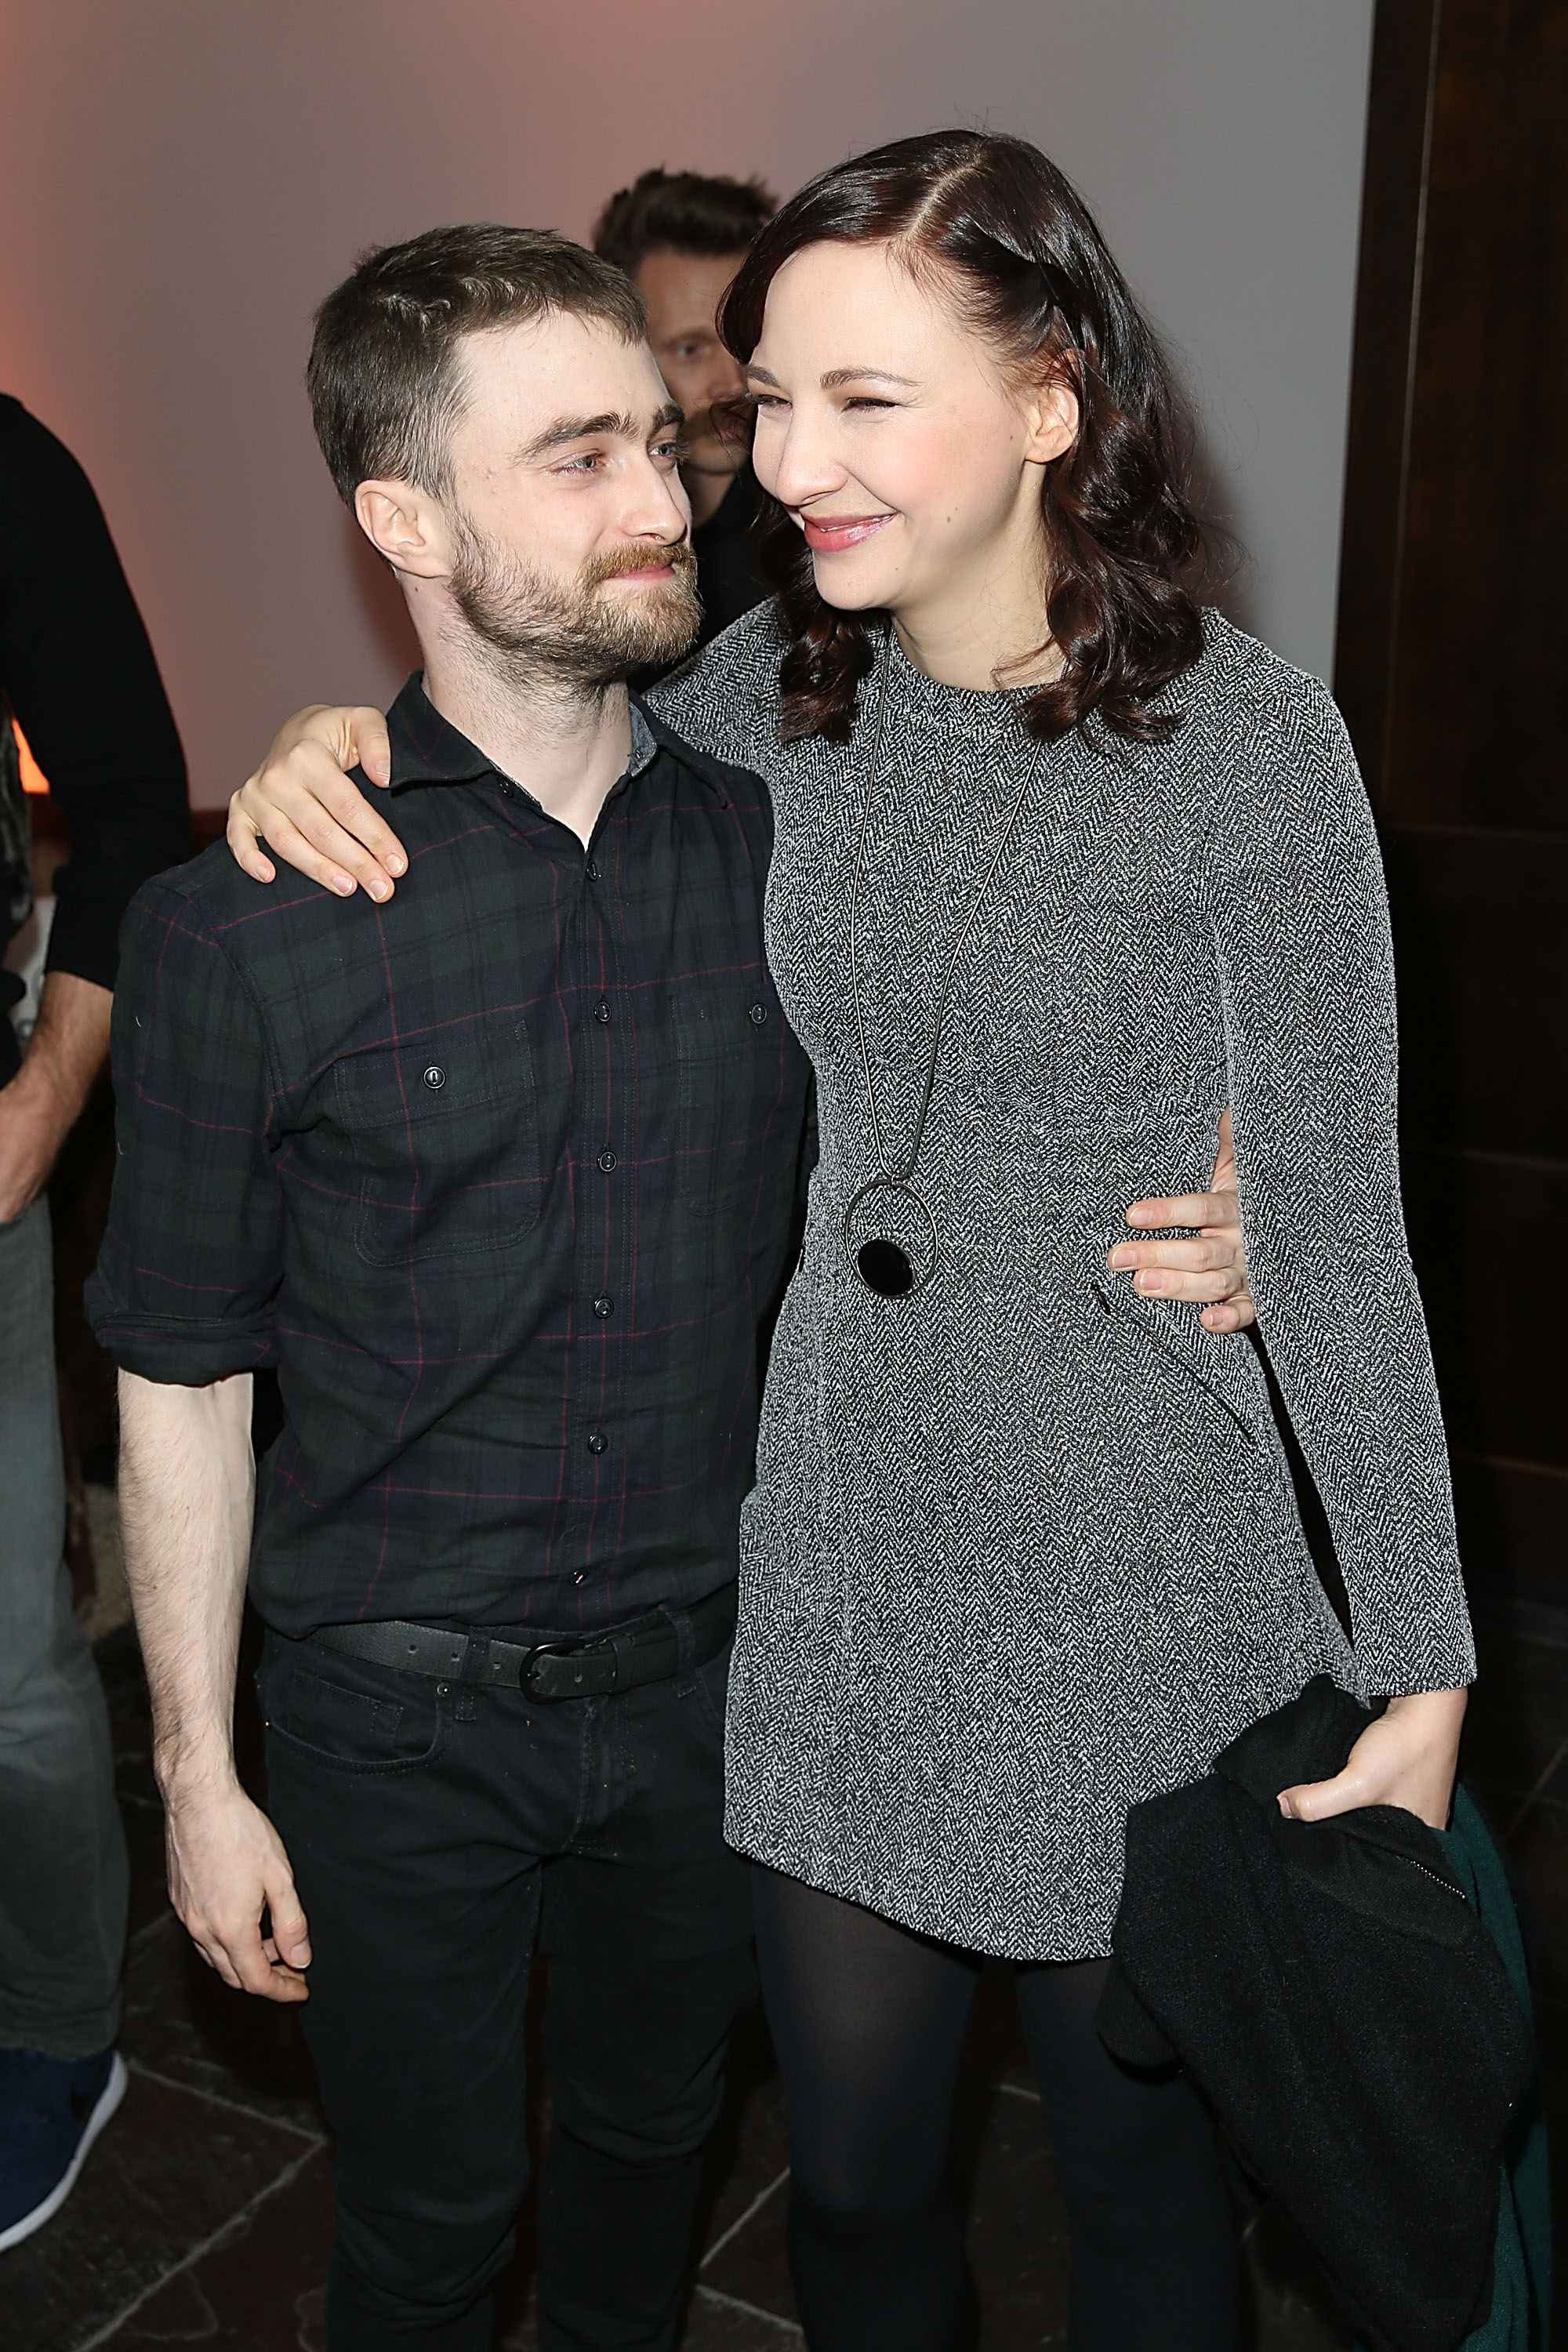 Daniel Radcliffe and Erin Darke at the "Swiss Army Man" premiere in Utah in 2016 | Source: Getty Images